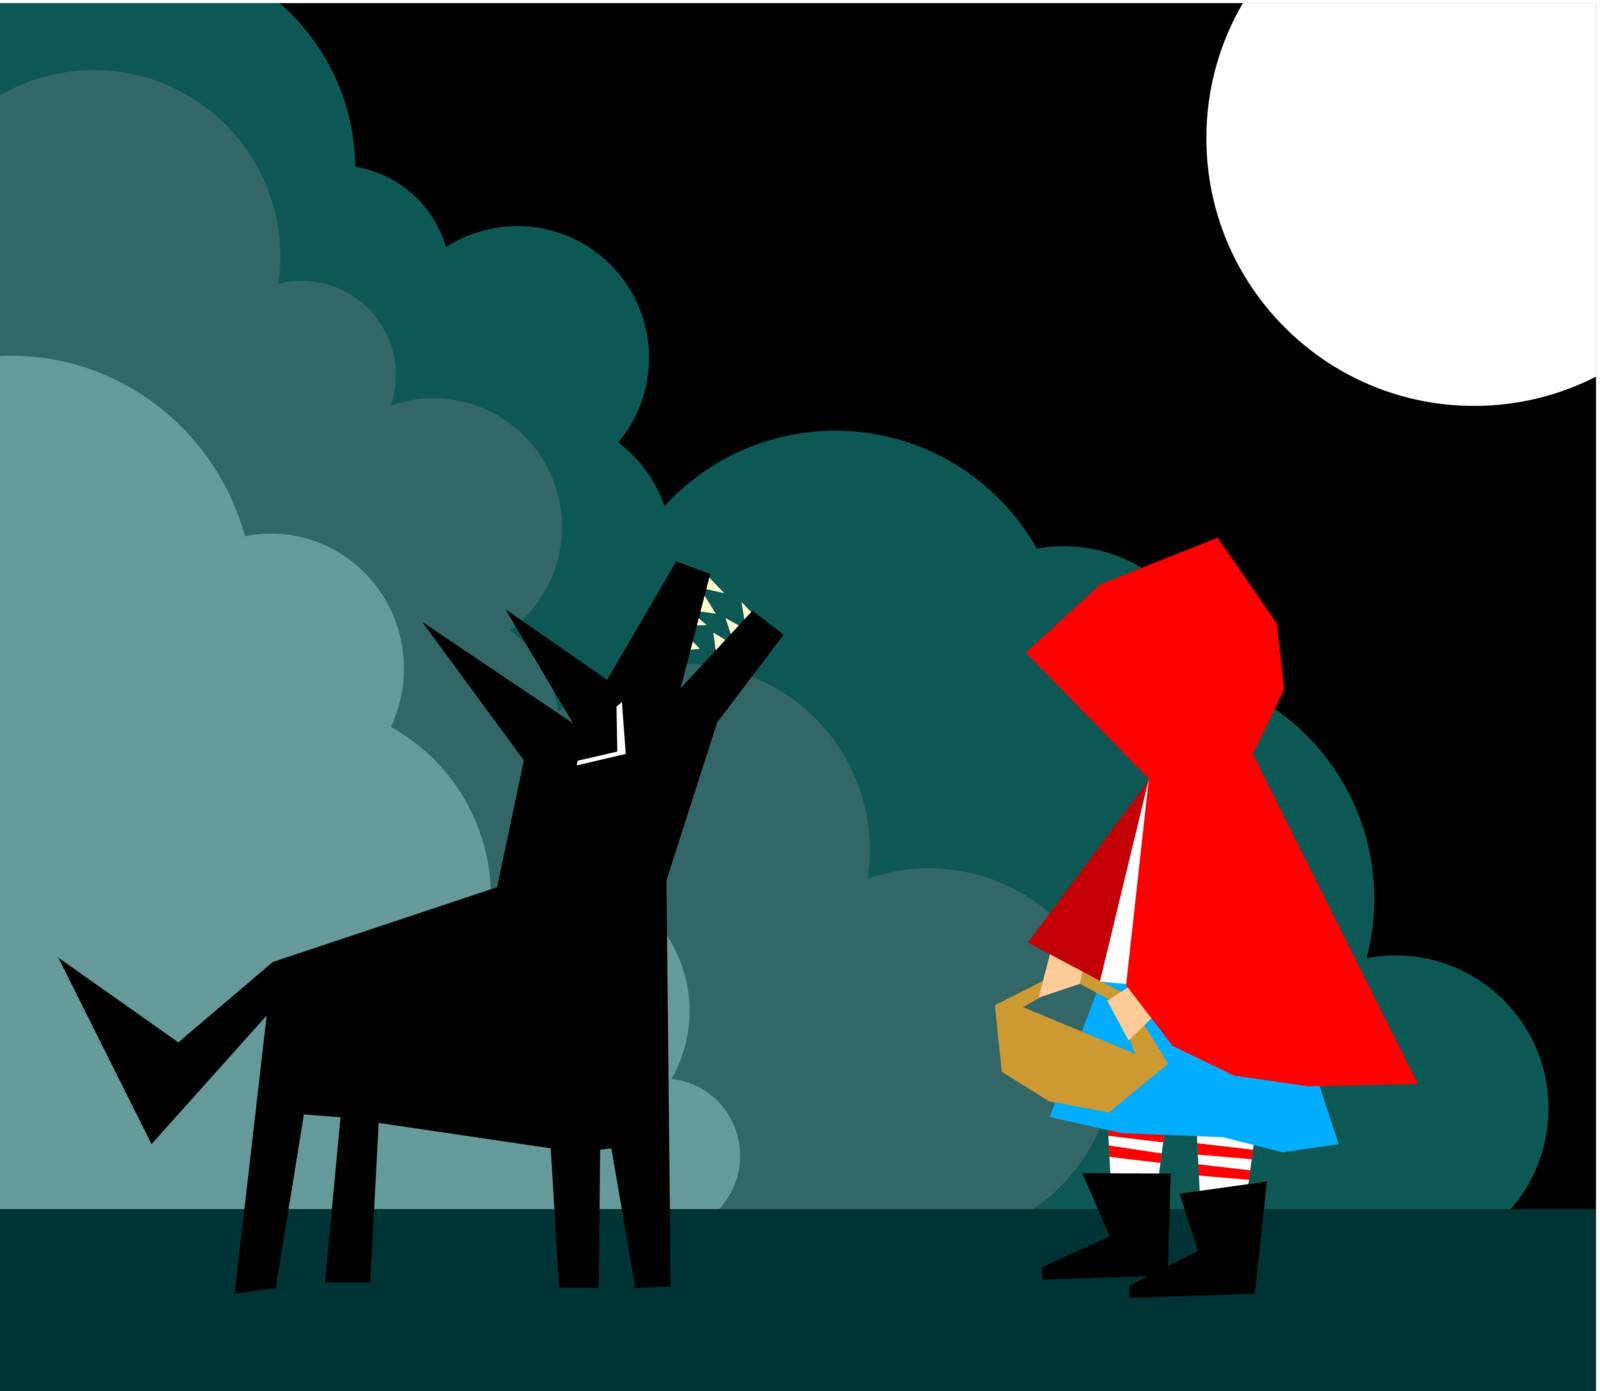 Little Red Riding Hood and the Wolf in the forest